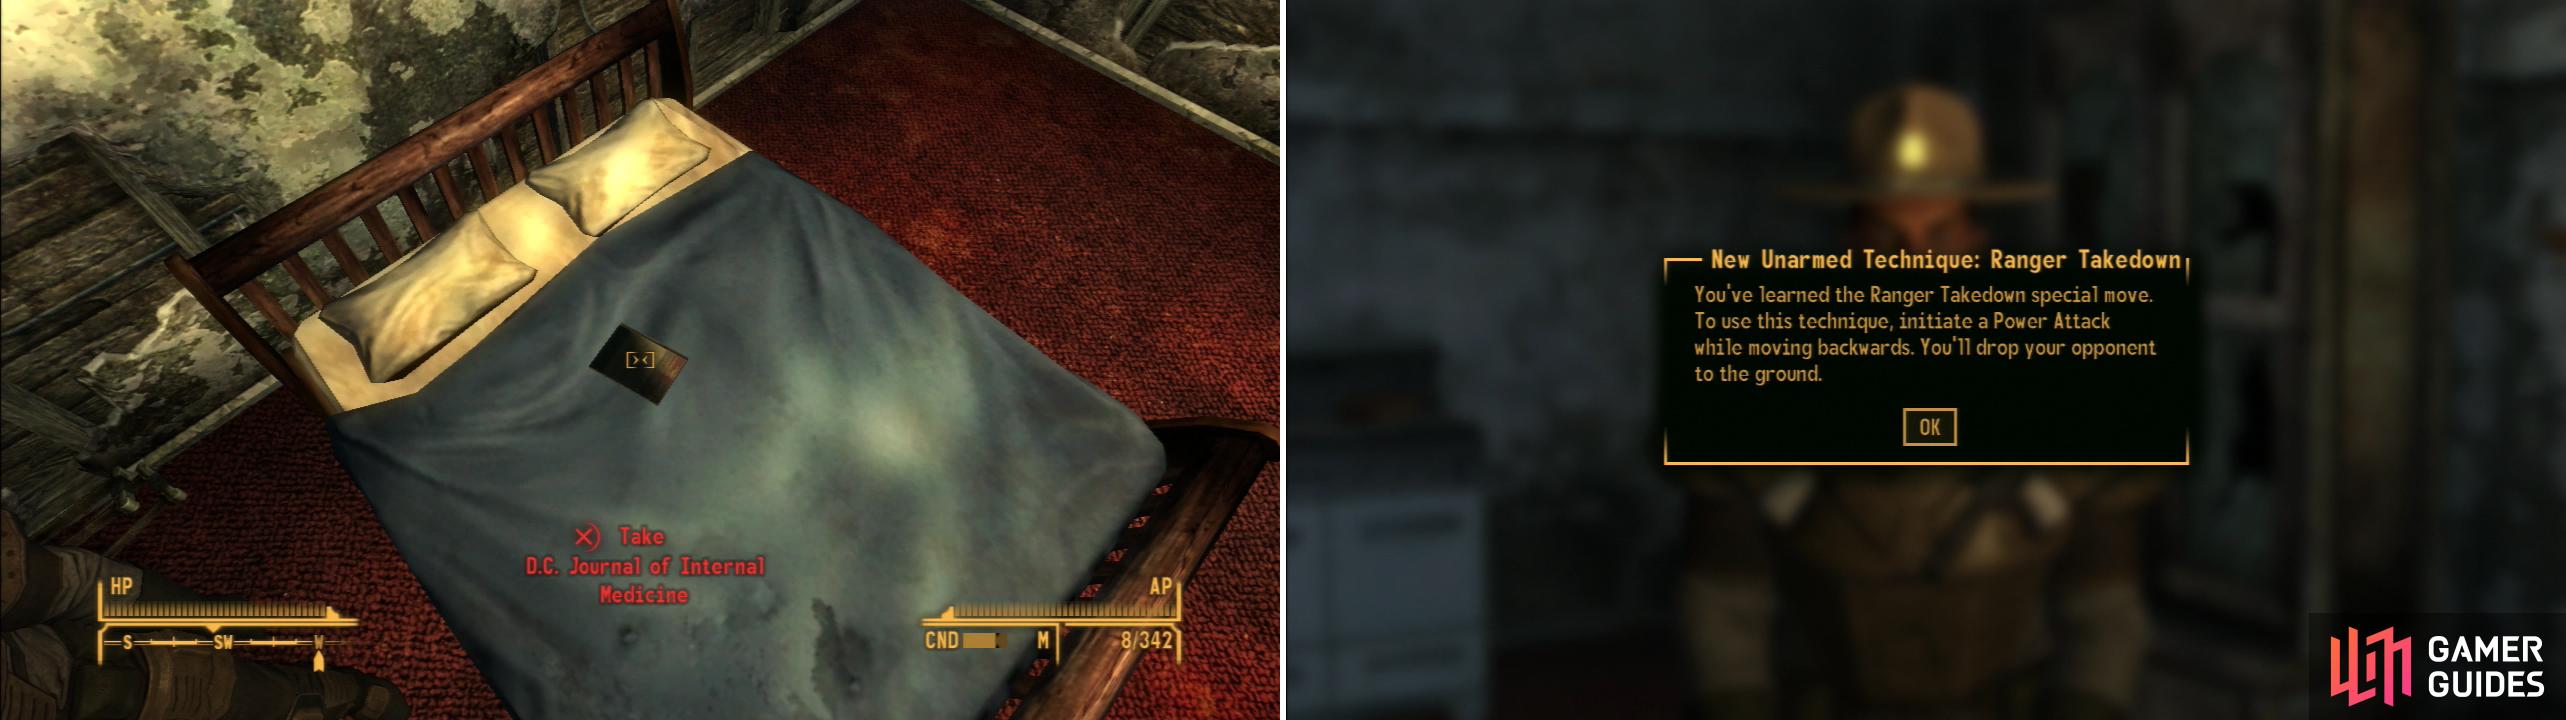 Grab the D.C. Journal of Internal Medicine from the bed in Ranger Andy’s Bungalow (left) and learn the Ranger Takedown technique from him (right).